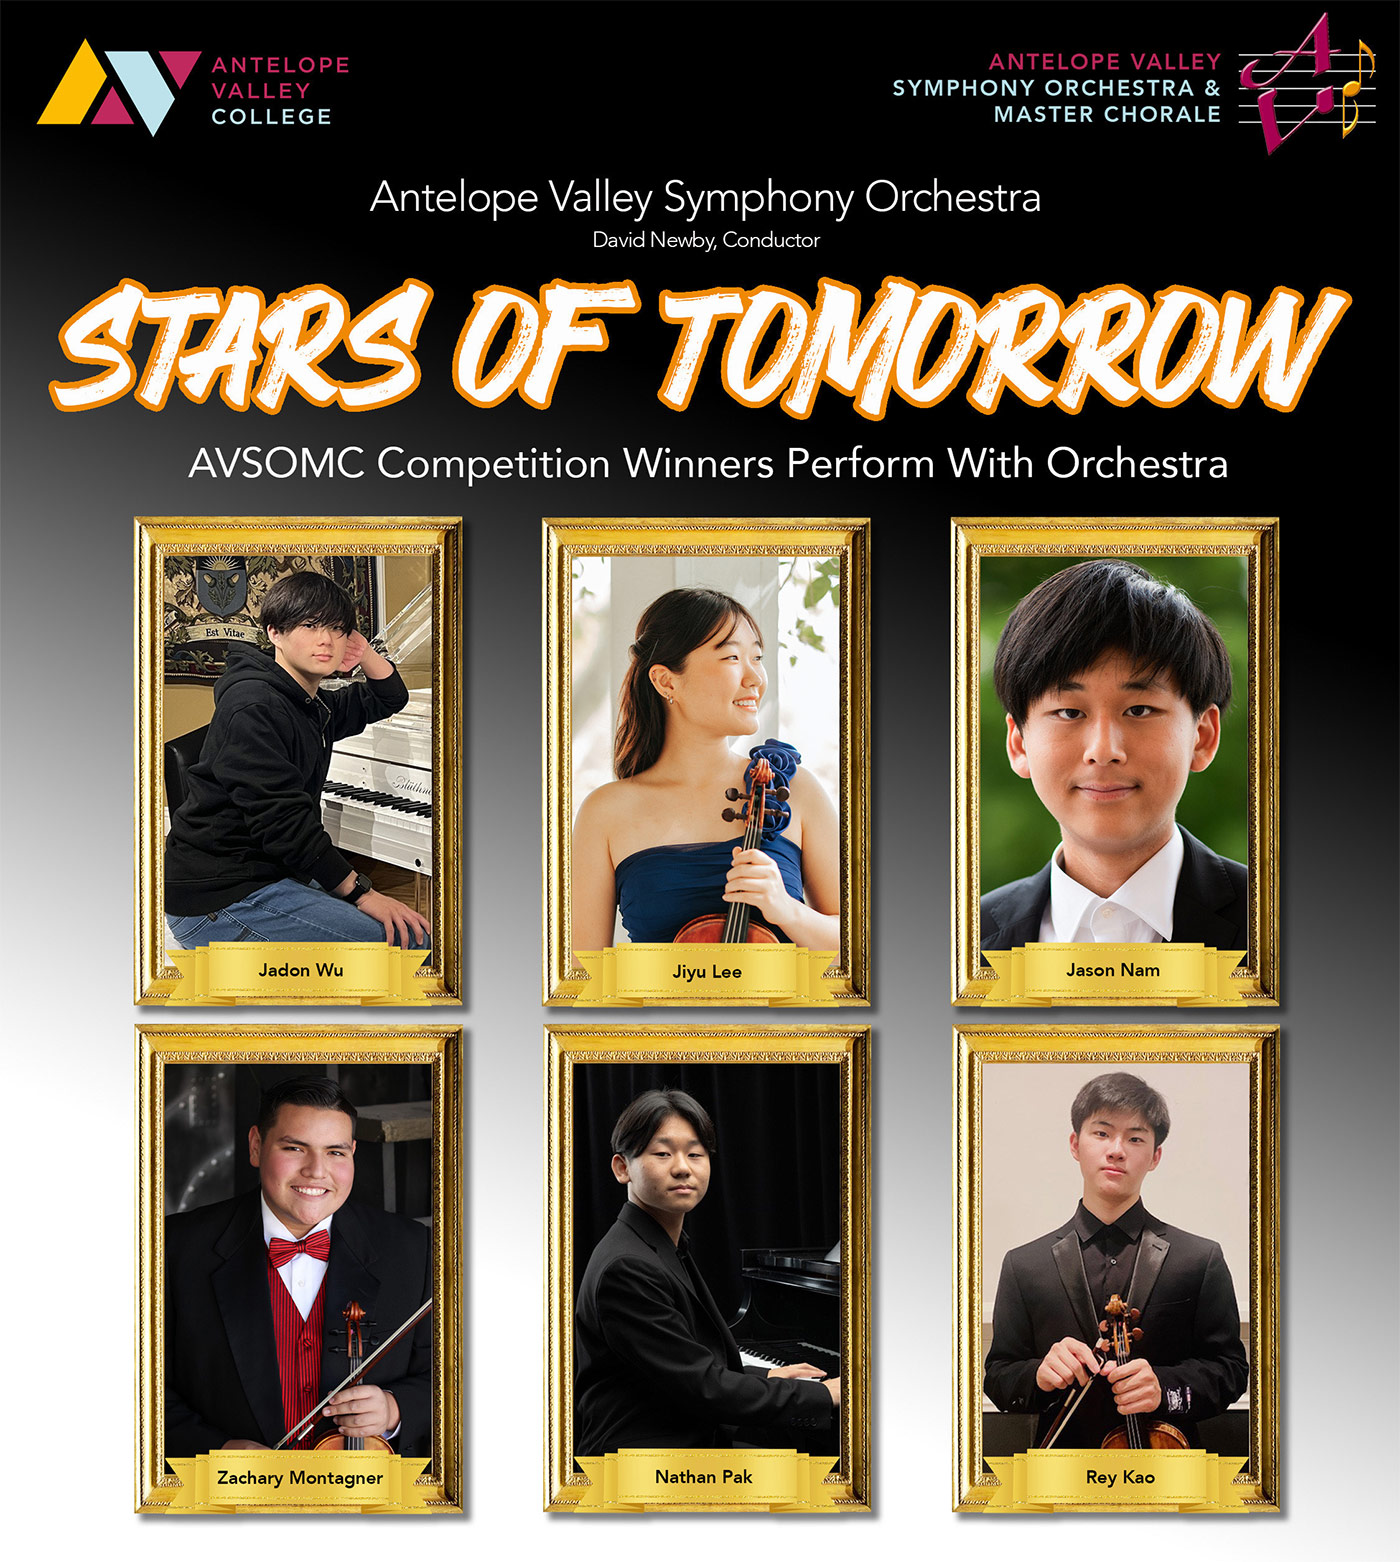 Stars of Tomorrow. AVSOMC Competition Winners Perform with Orchestra. Competition winners include: Jadon Wu, Jiyu Lee, Jason Nam, Zachary Montagner, Nathan Pak and Rey Kao. Music of Mozart, Beethoven, Tchaikovsky, Rachmaninoff & Sibelius.